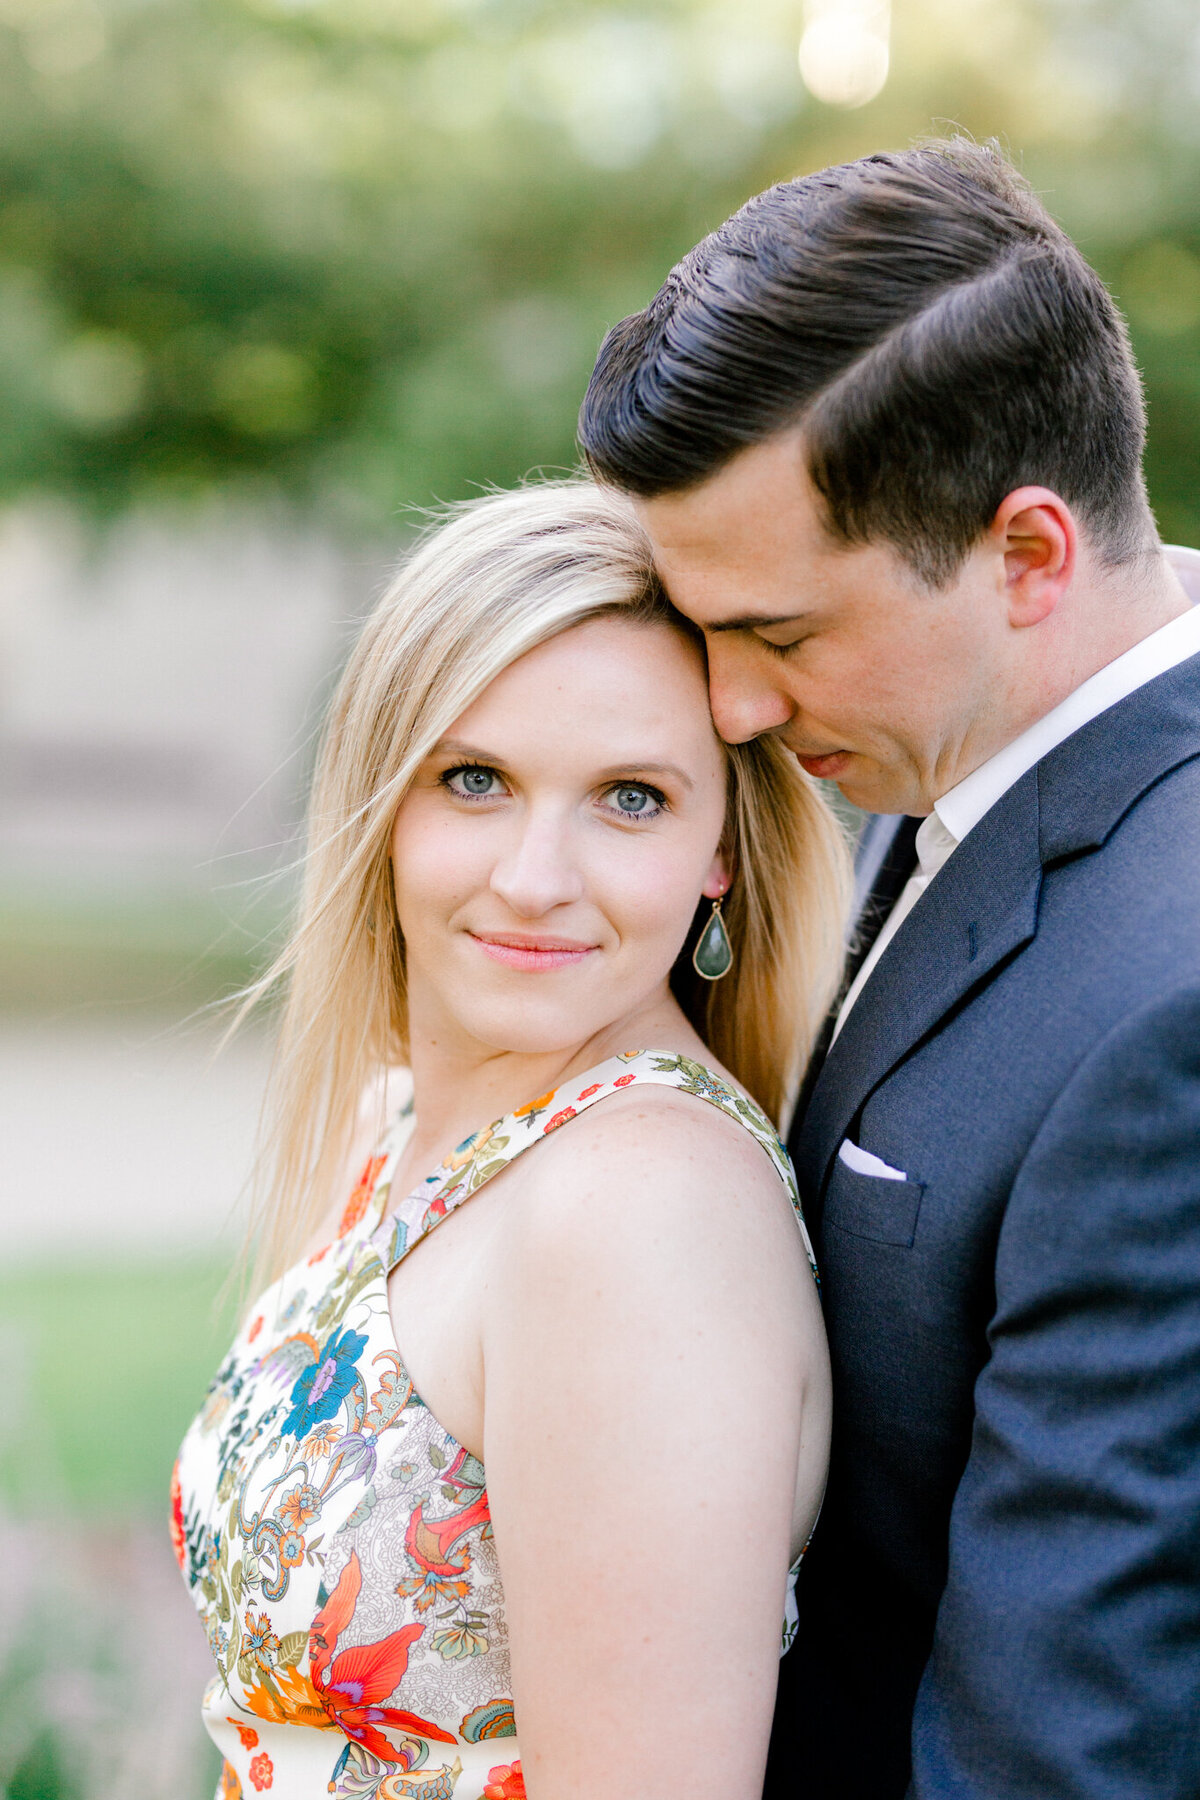 Montanna & KC Engagement Session at the Dallas Arts District | DFW Wedding Photographer | Sami Kathryn Photography-7